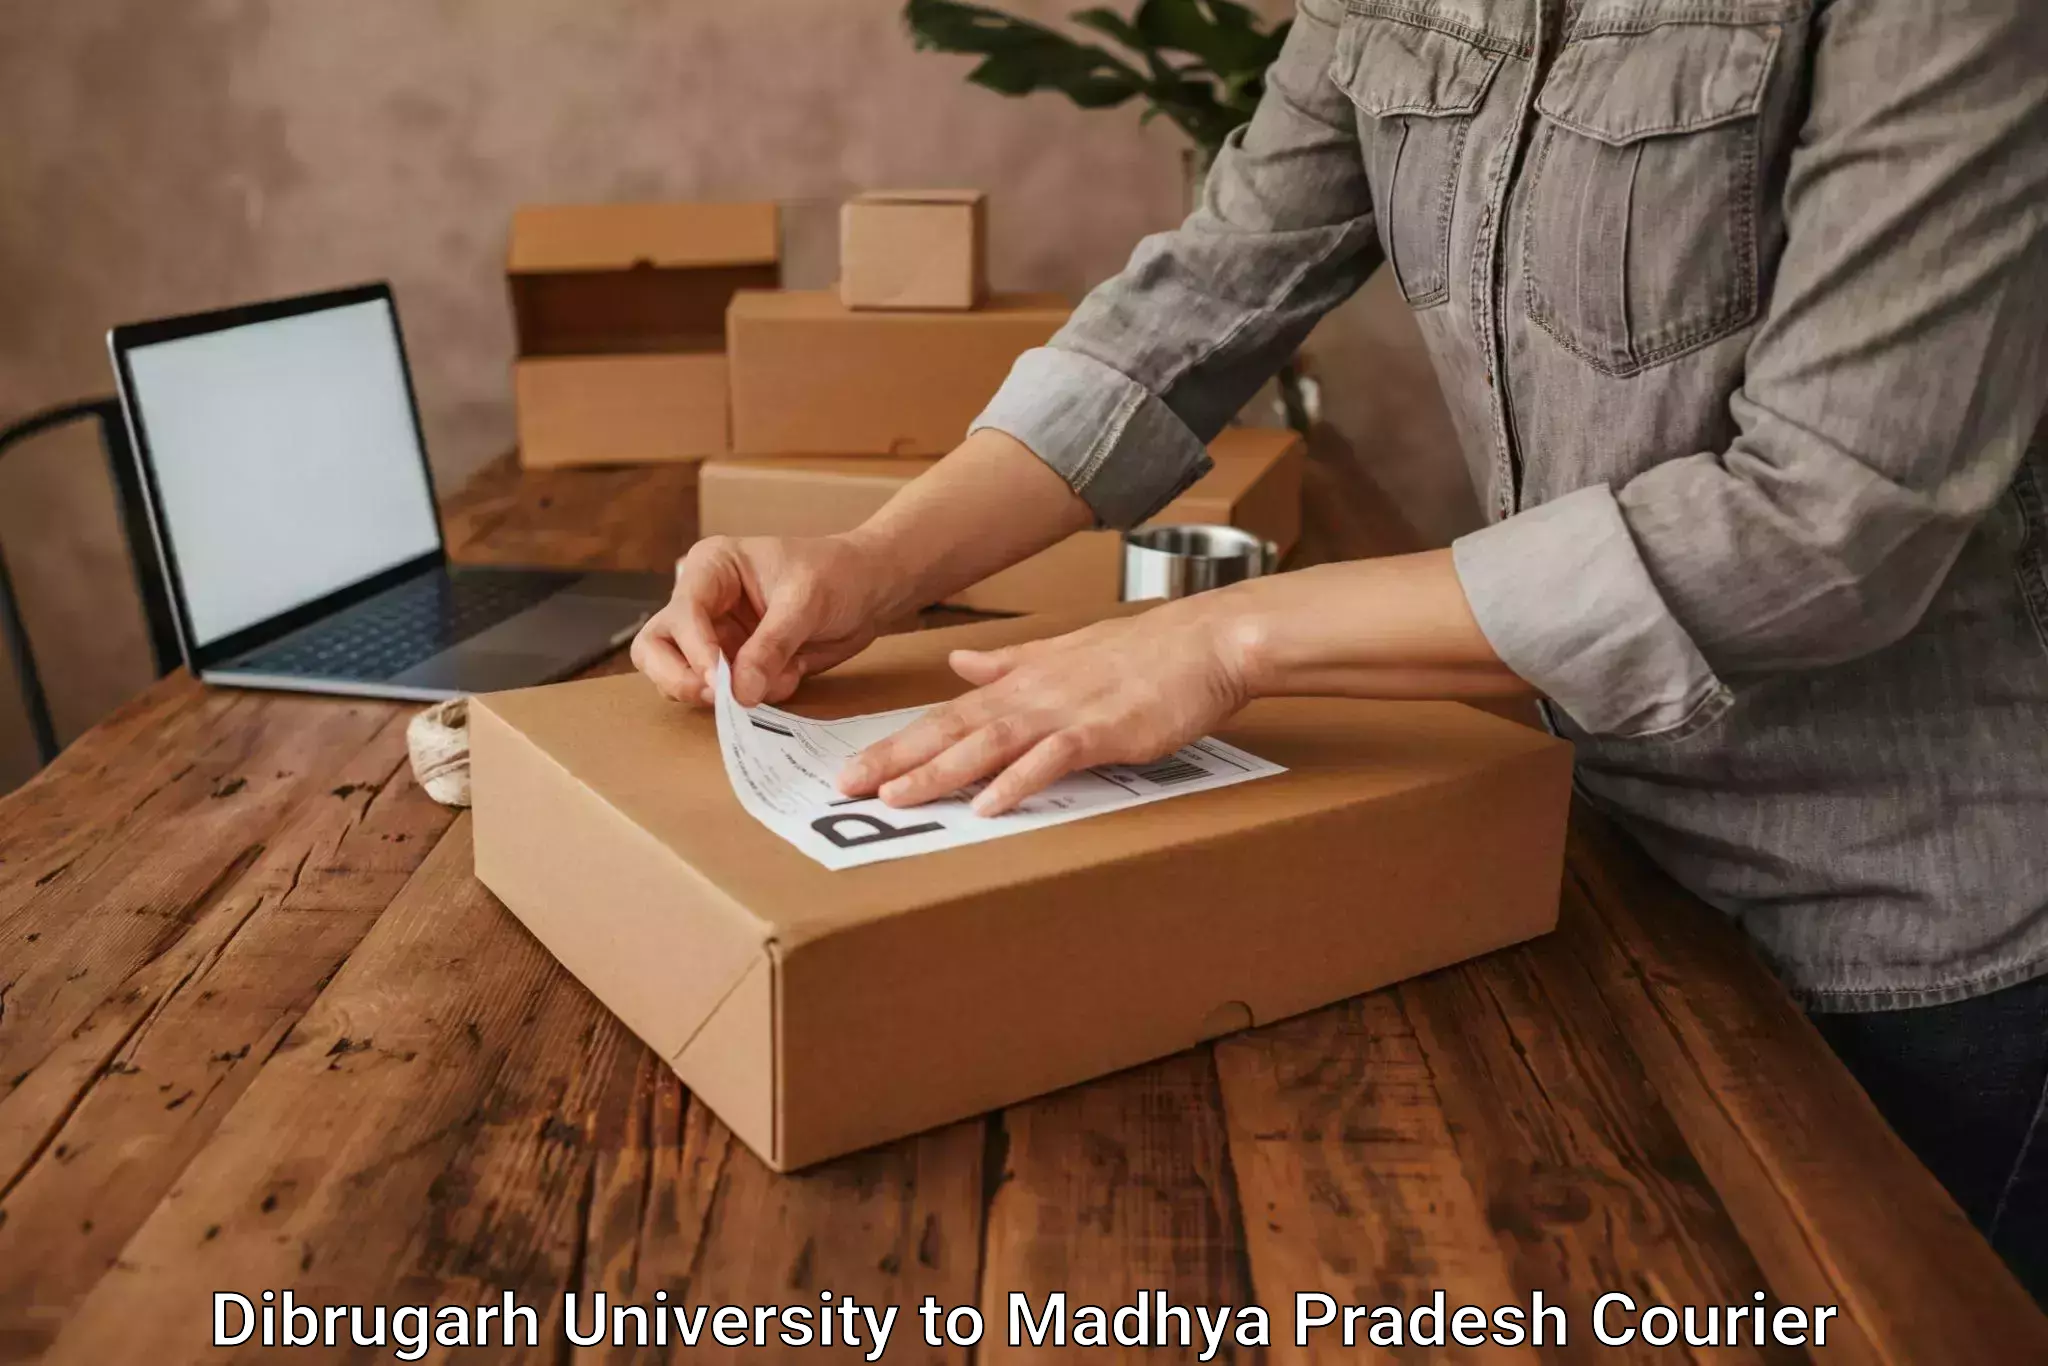 Expedited parcel delivery Dibrugarh University to Thikri